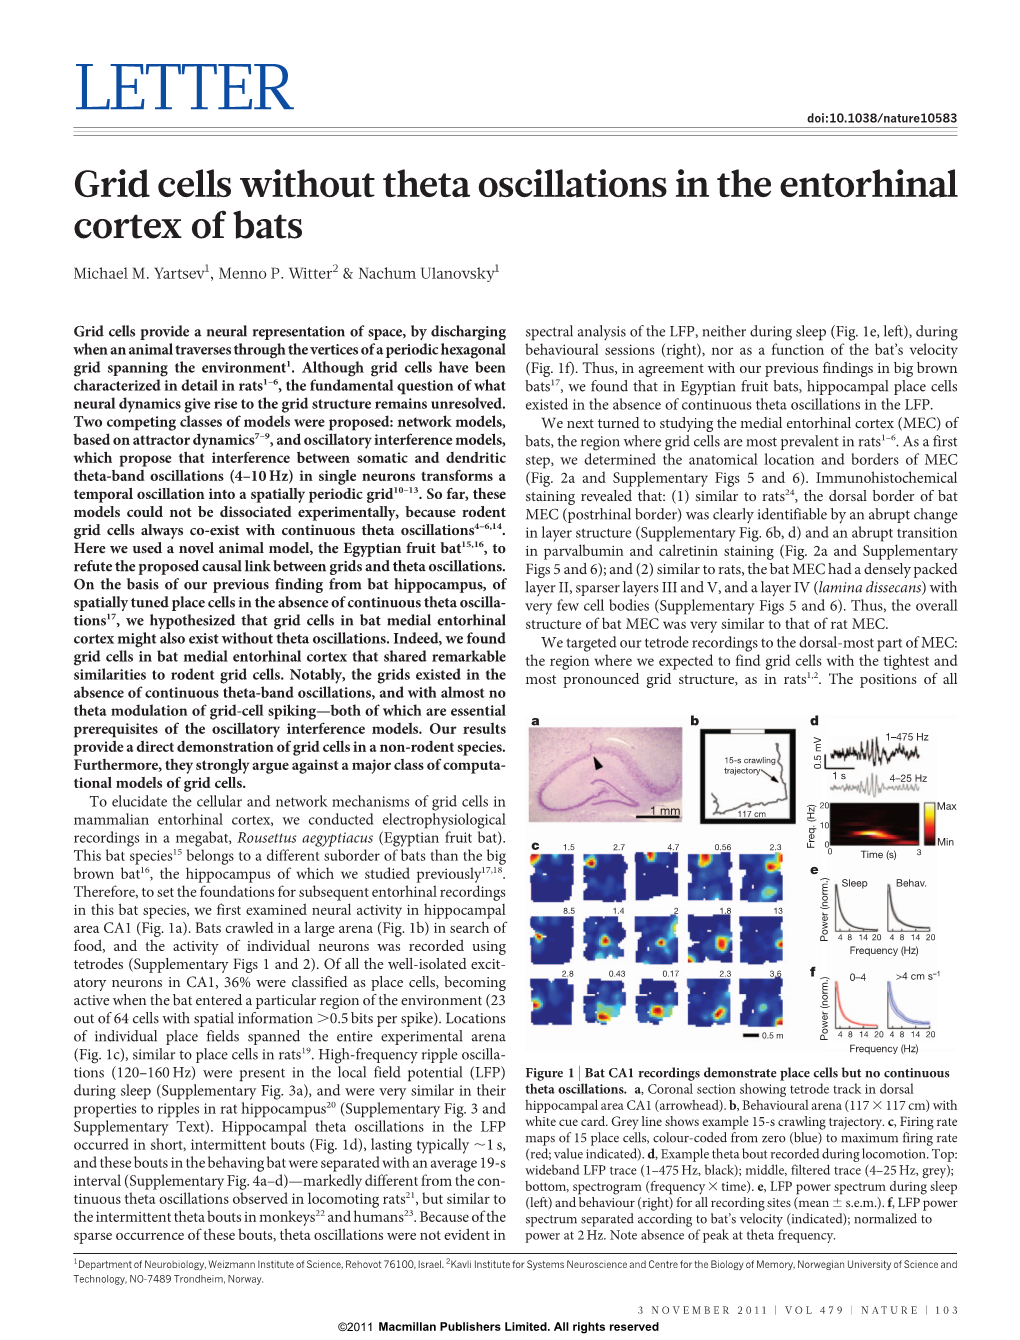 Grid Cells Without Theta Oscillations in the Entorhinal Cortex of Bats